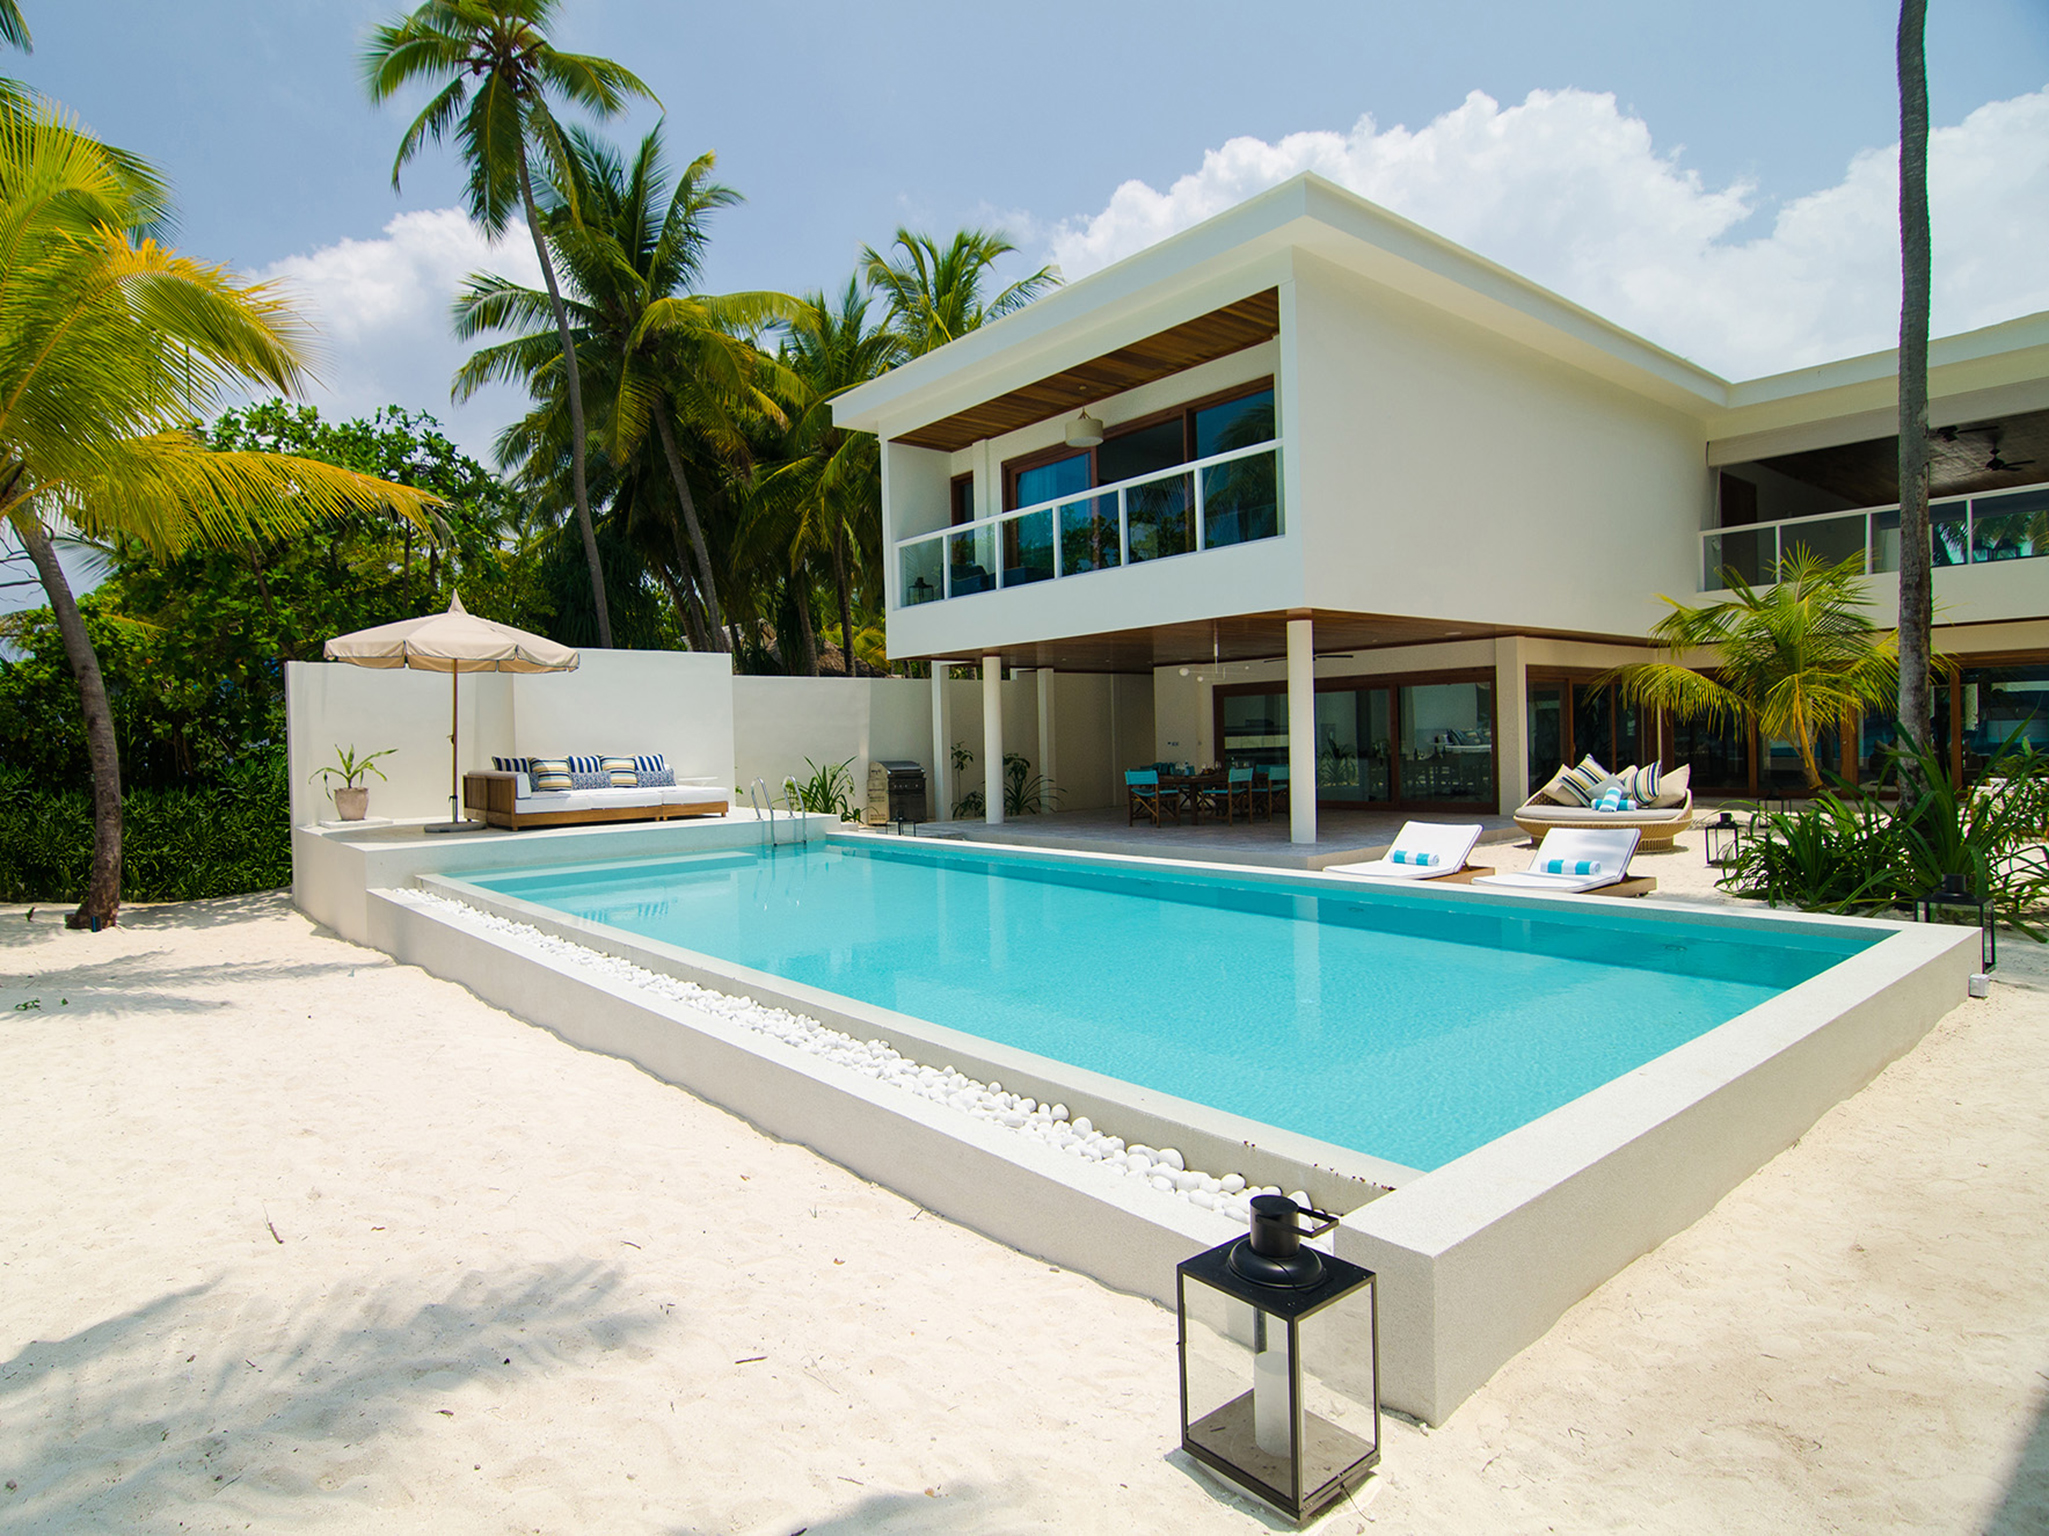 Bedroom Villa Residences - Relax and indulge poolside